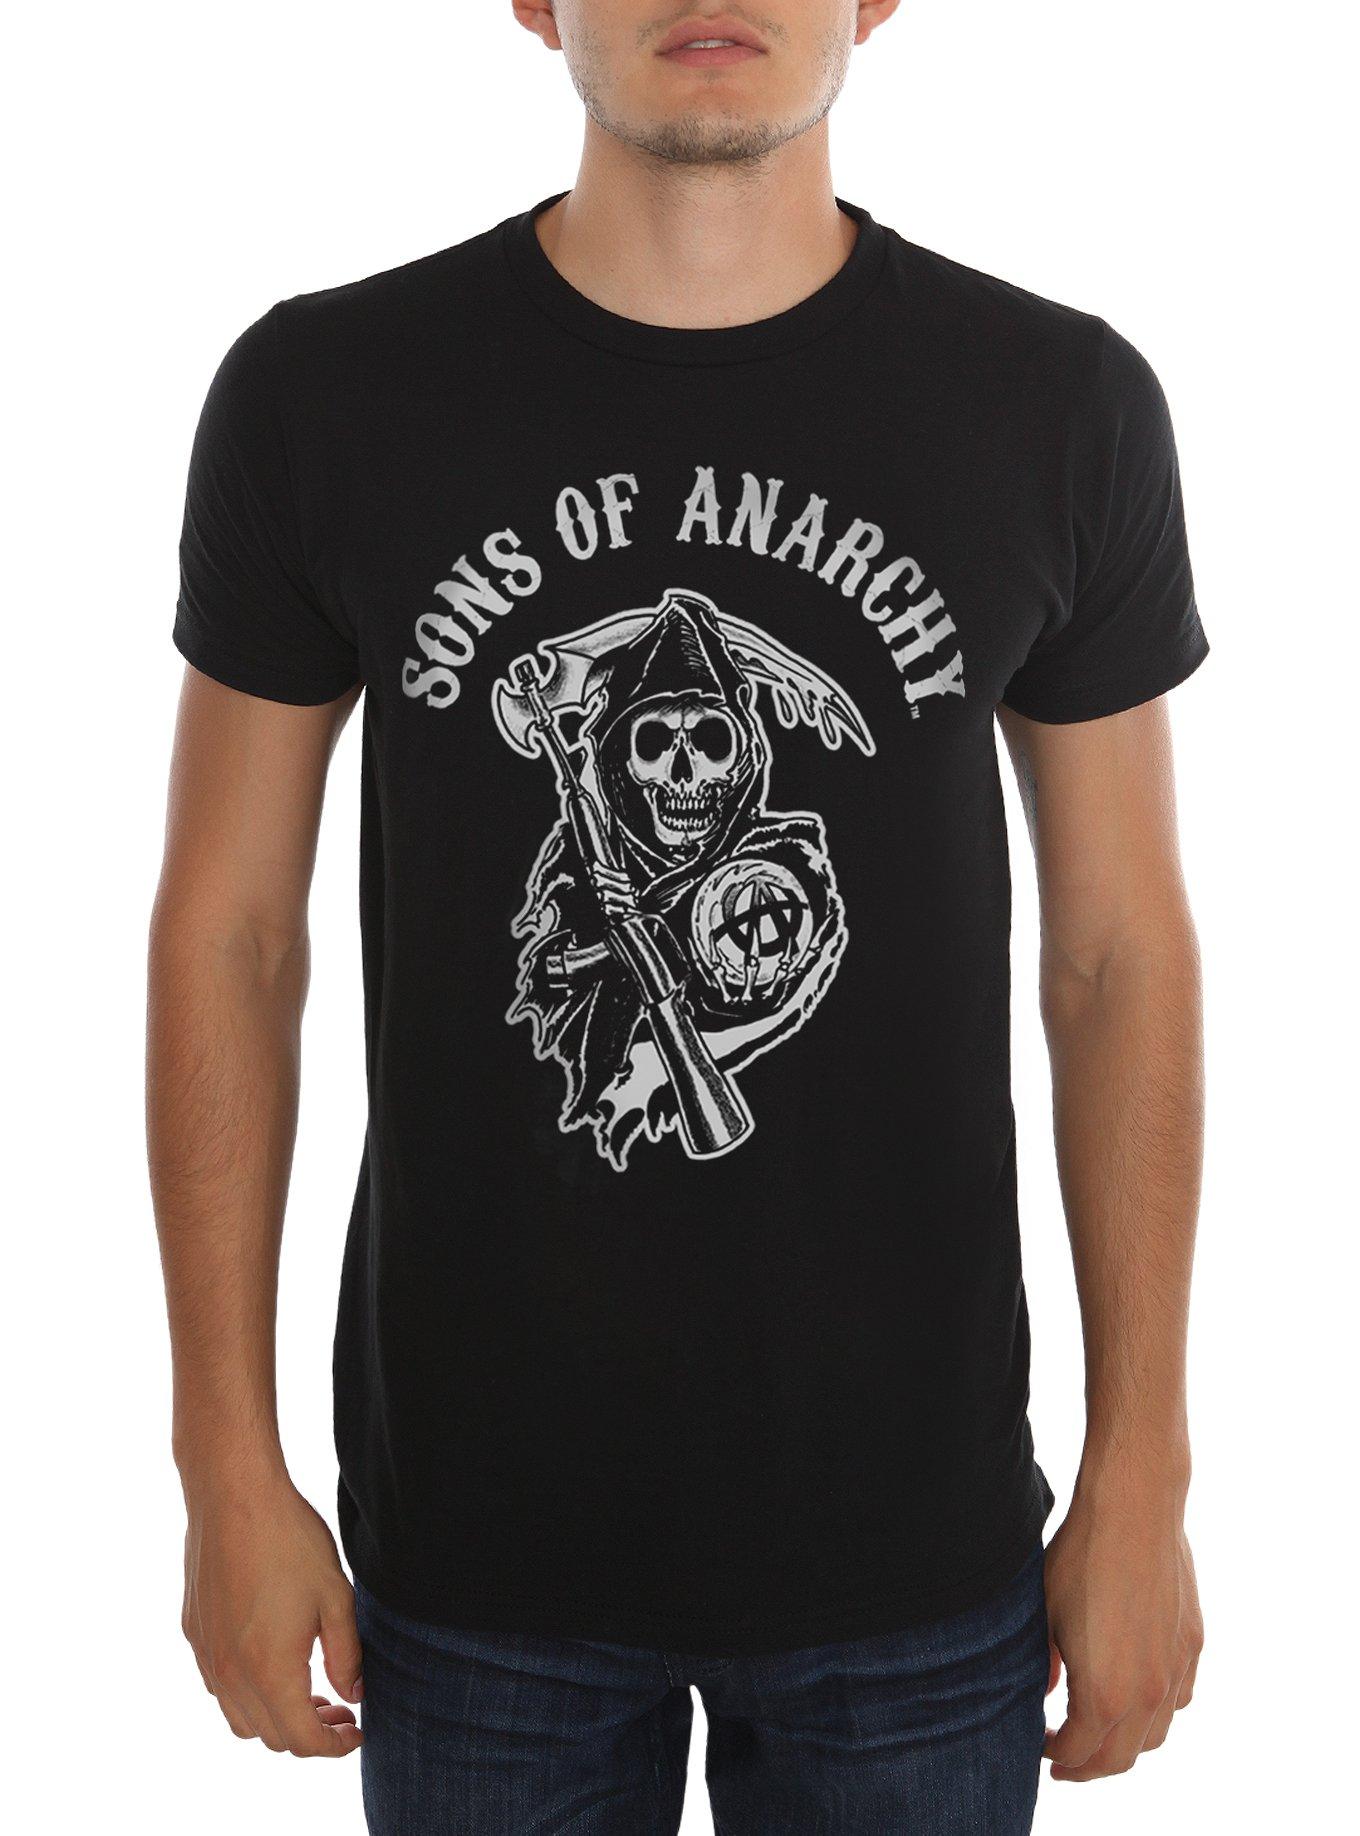 Of | T-Shirt Anarchy Logo Sons Topic Hot